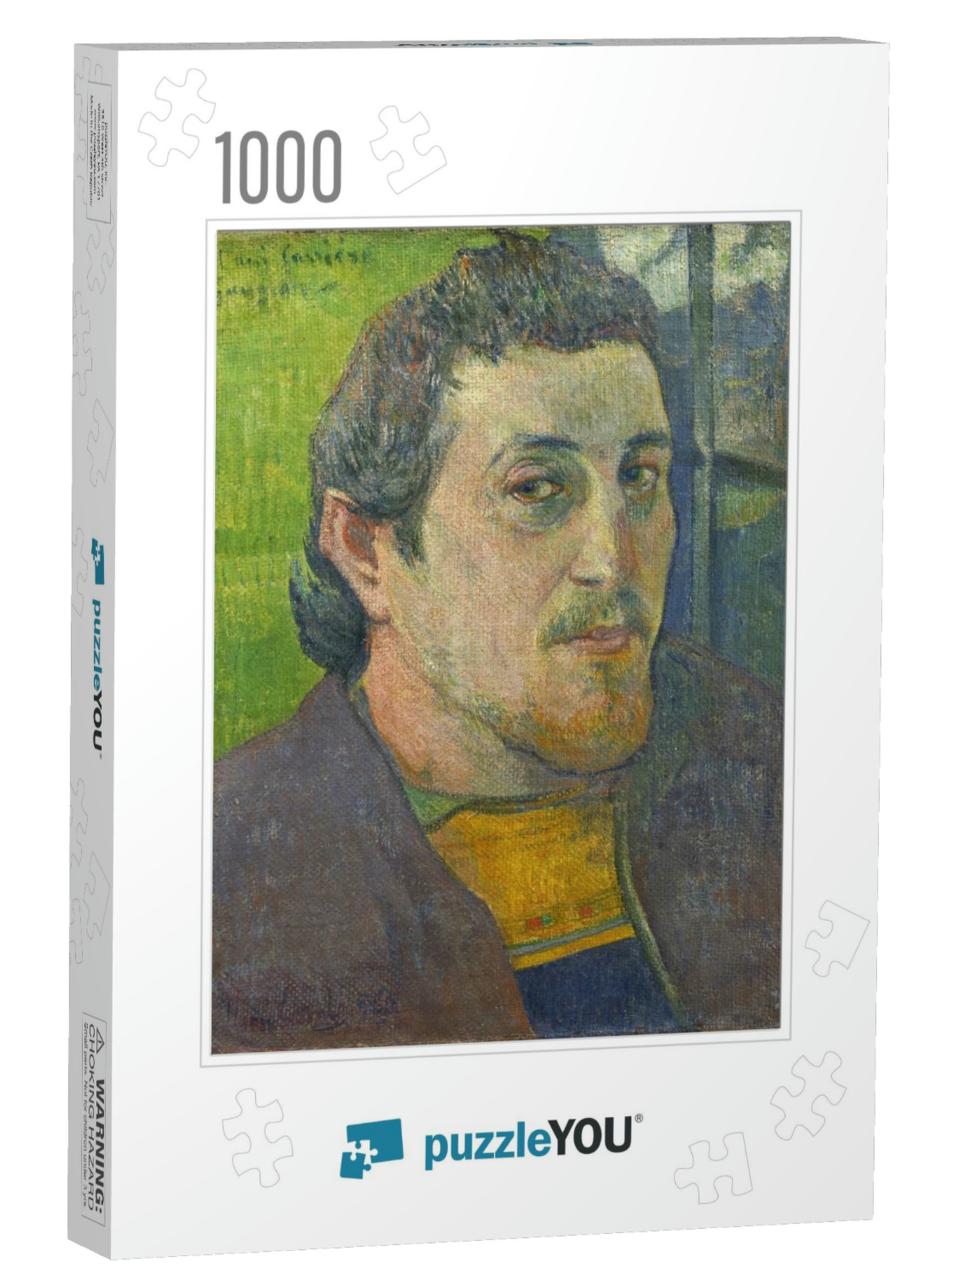 Self-Portrait Dedicated to Carriere, by Paul Gauguin, 188... Jigsaw Puzzle with 1000 pieces